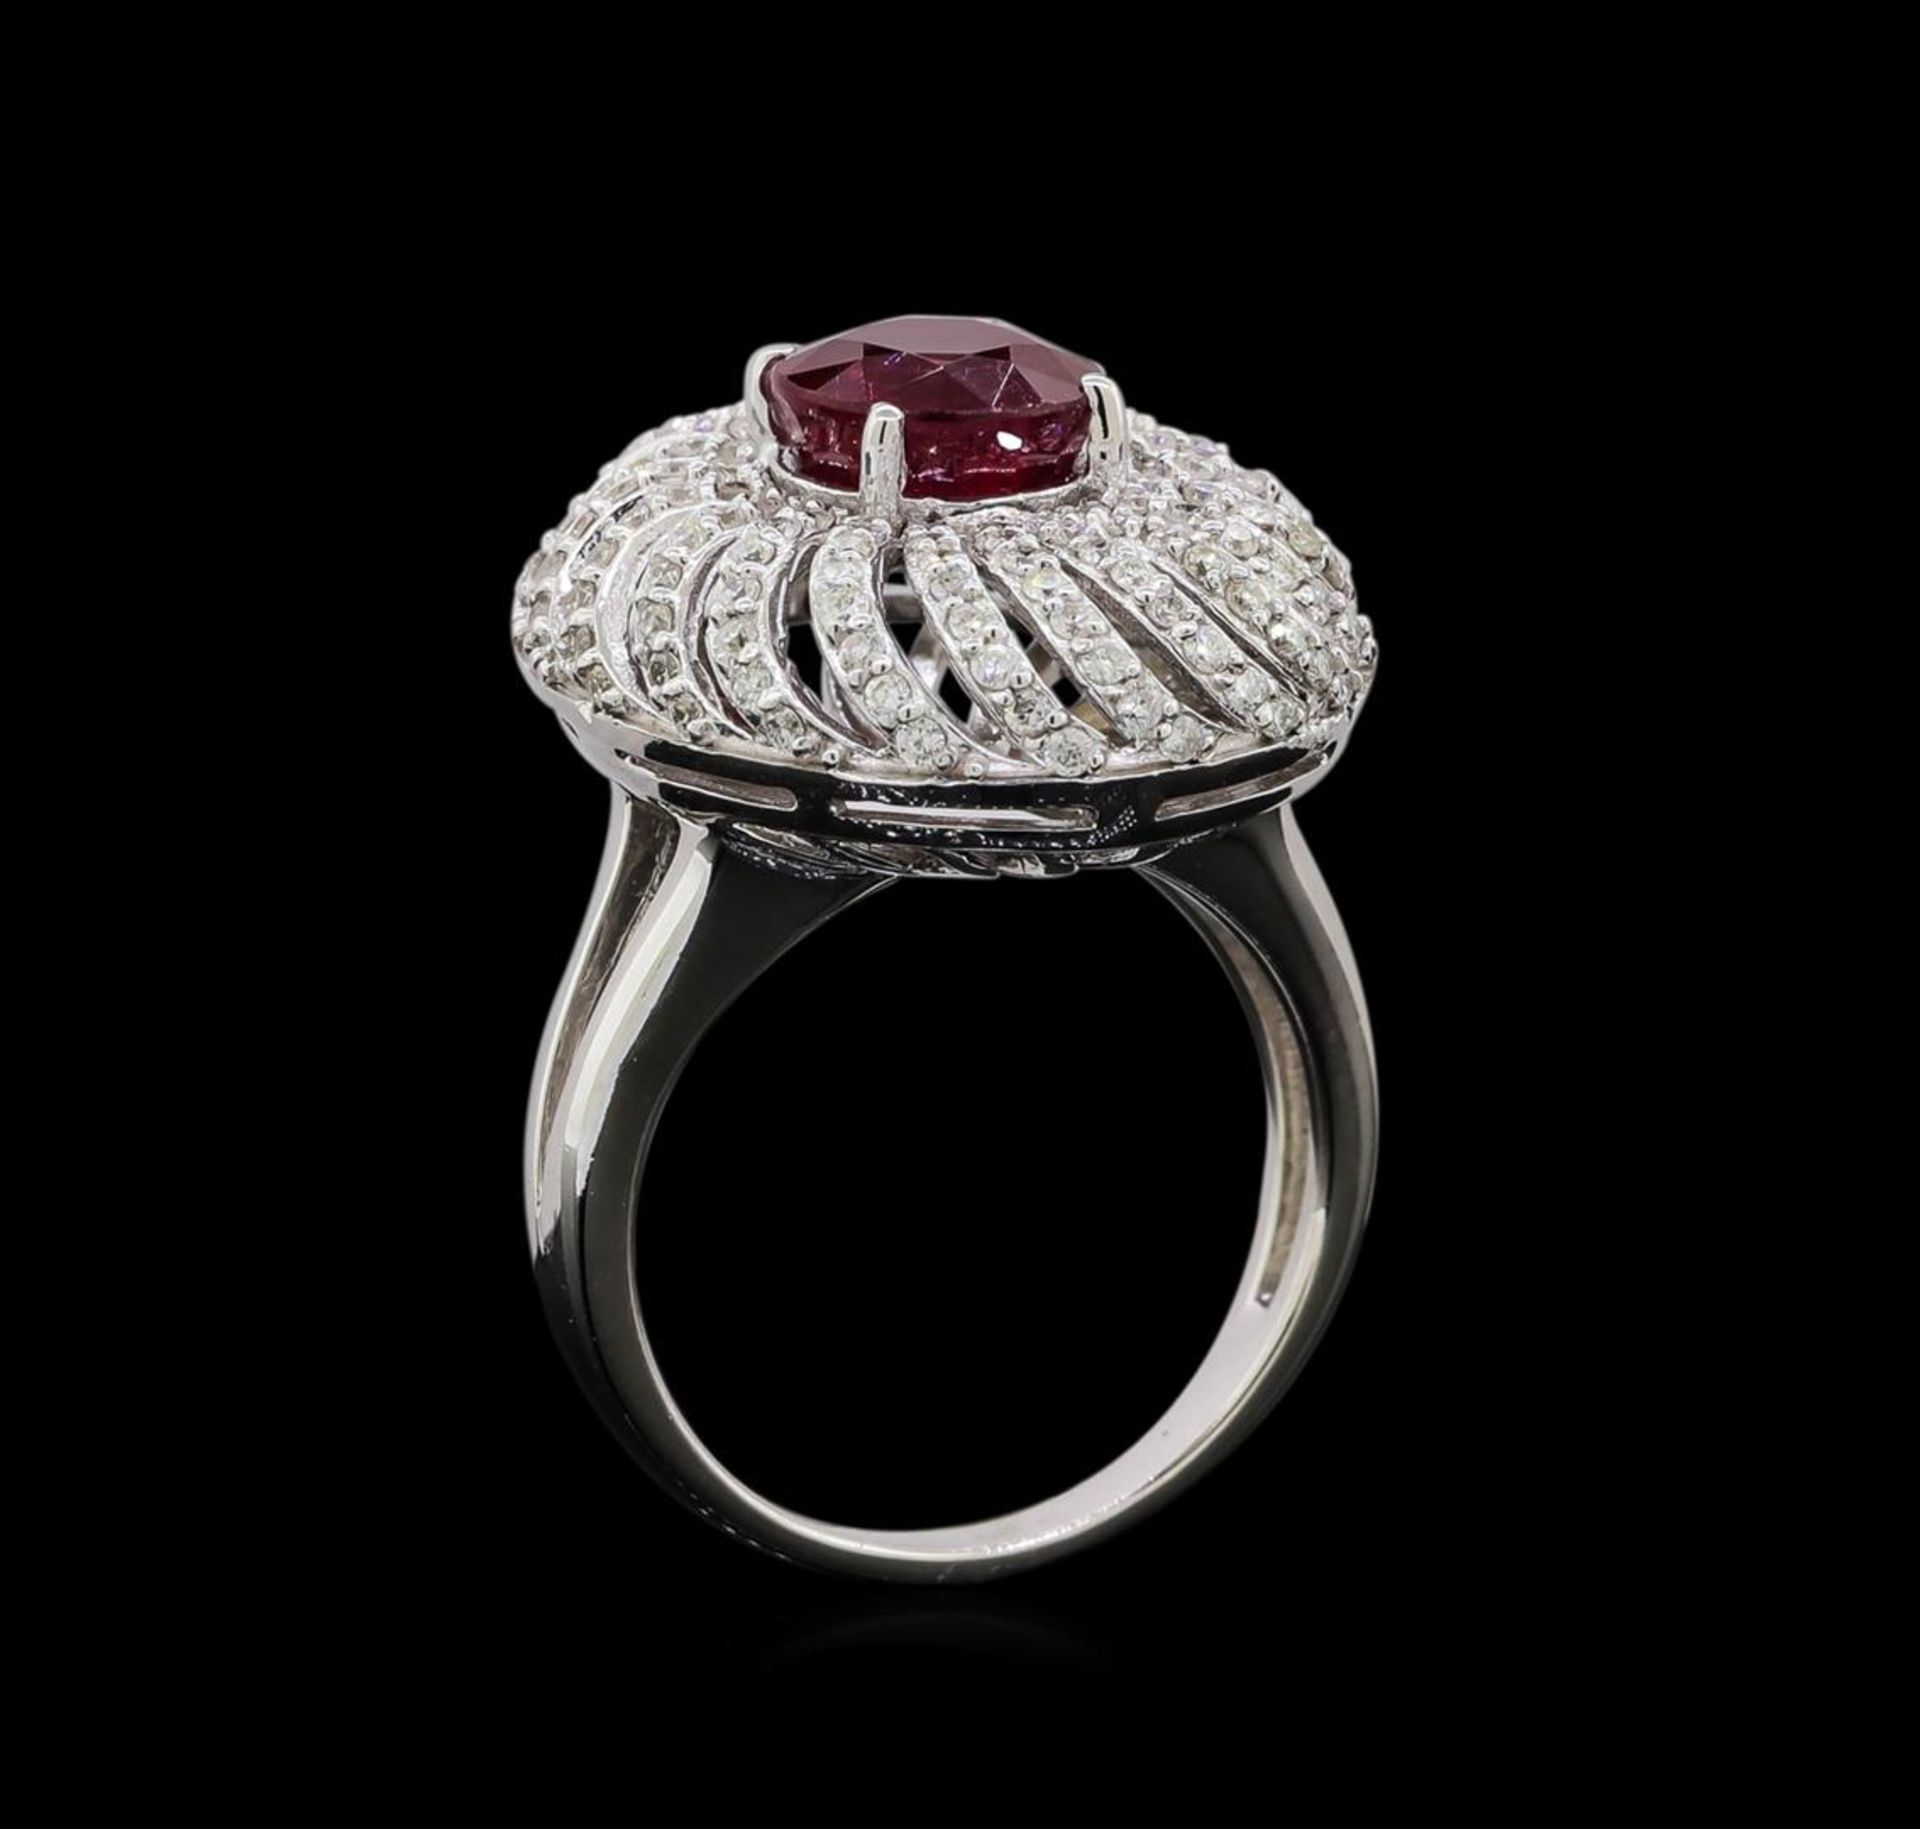 14KT White Gold 2.73 ctw Ruby and Diamond Ring - Image 4 of 5